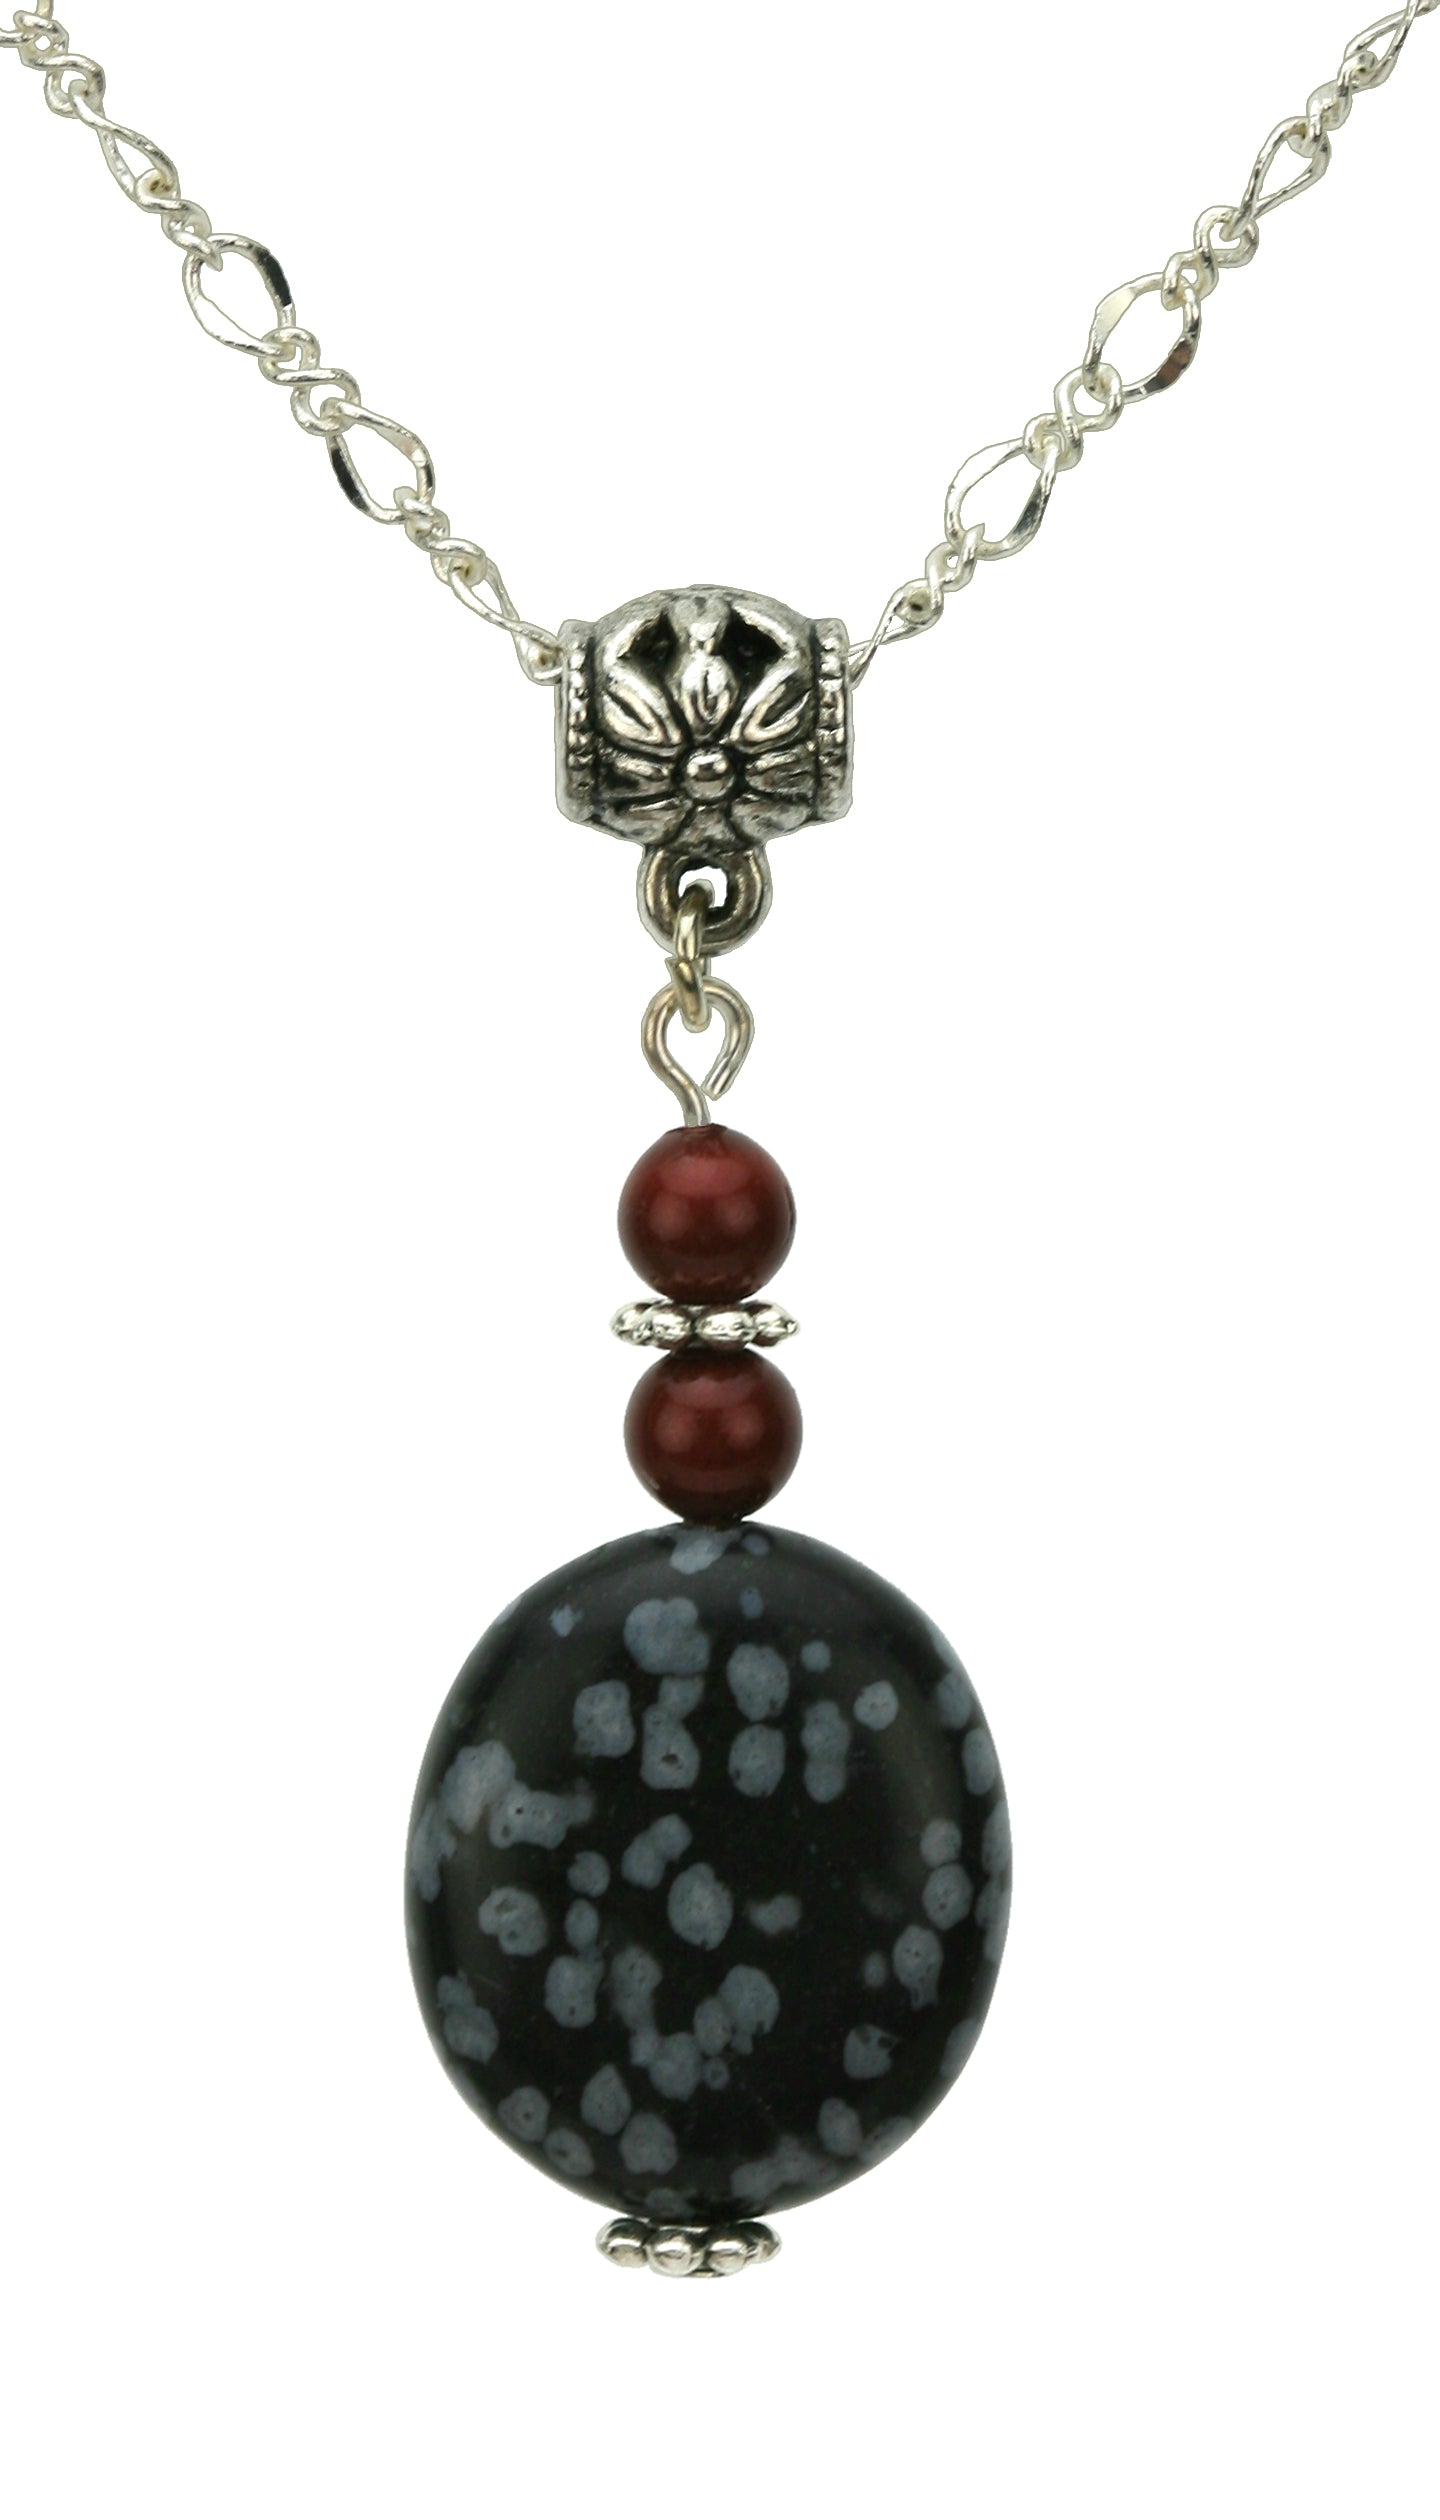 Snow Obsidian and Bordeaux Pearls Silver Pendant